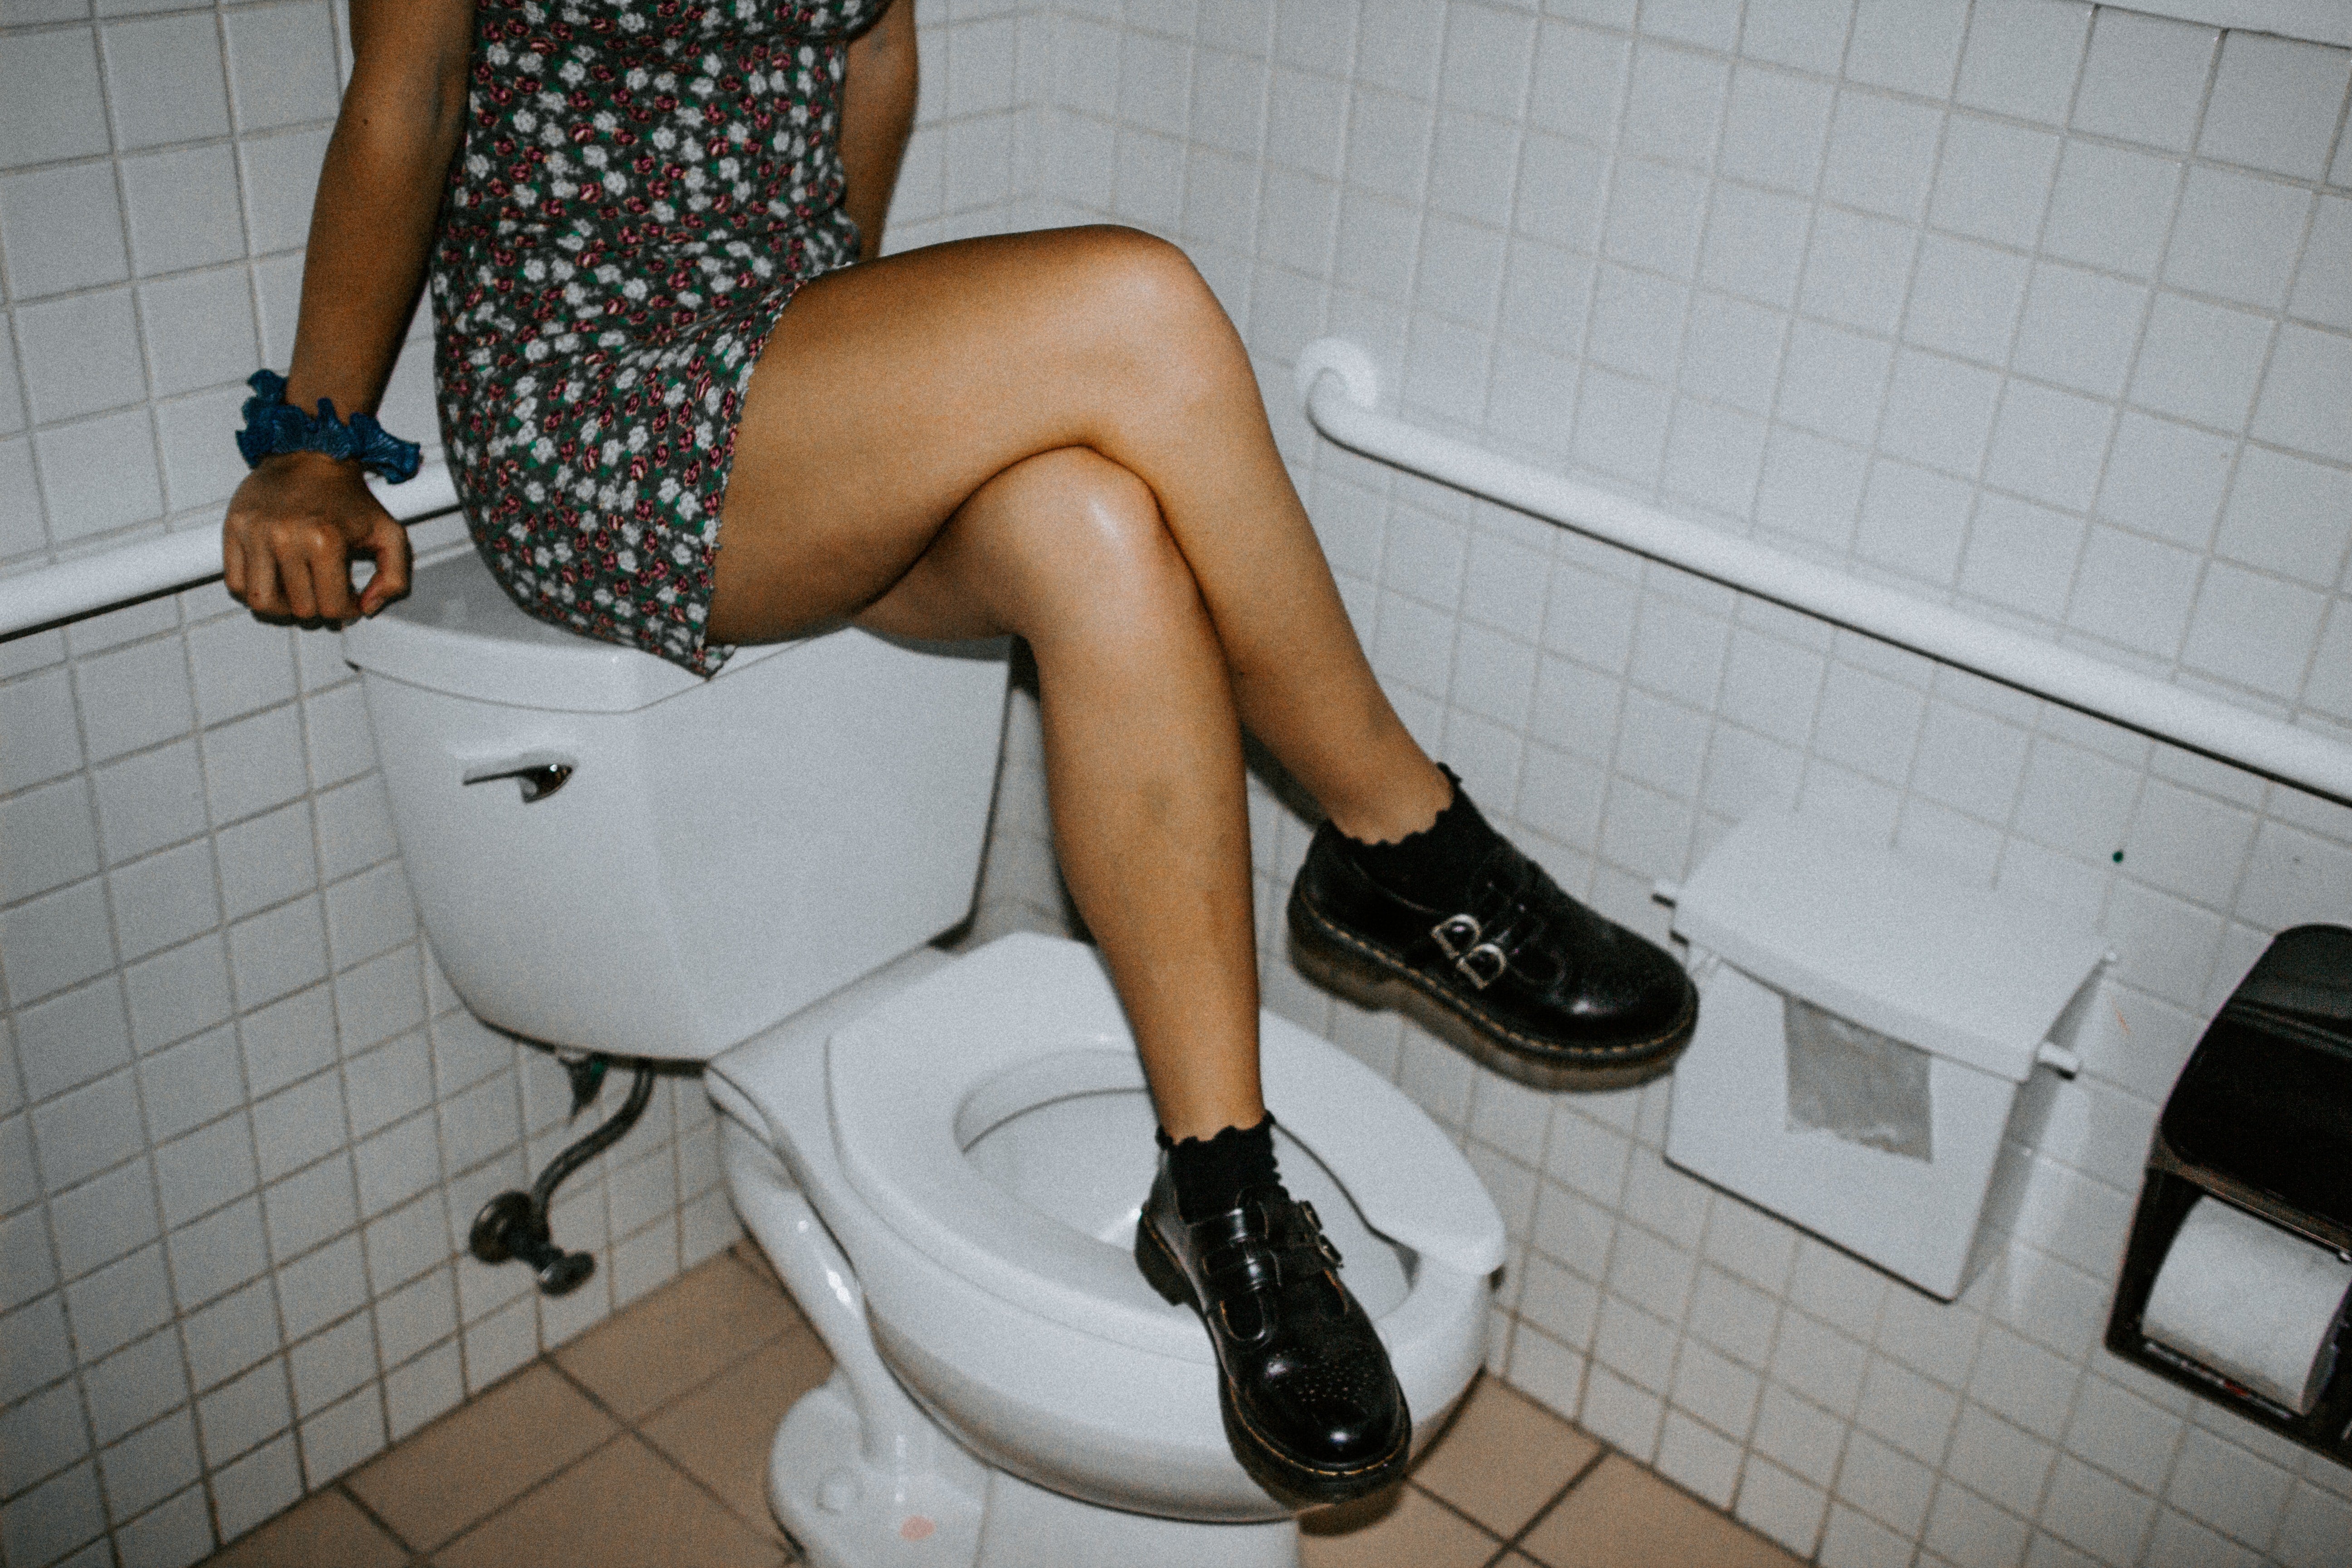 Urinary tract infections could be caused by holding your pee, a survey suggests. image